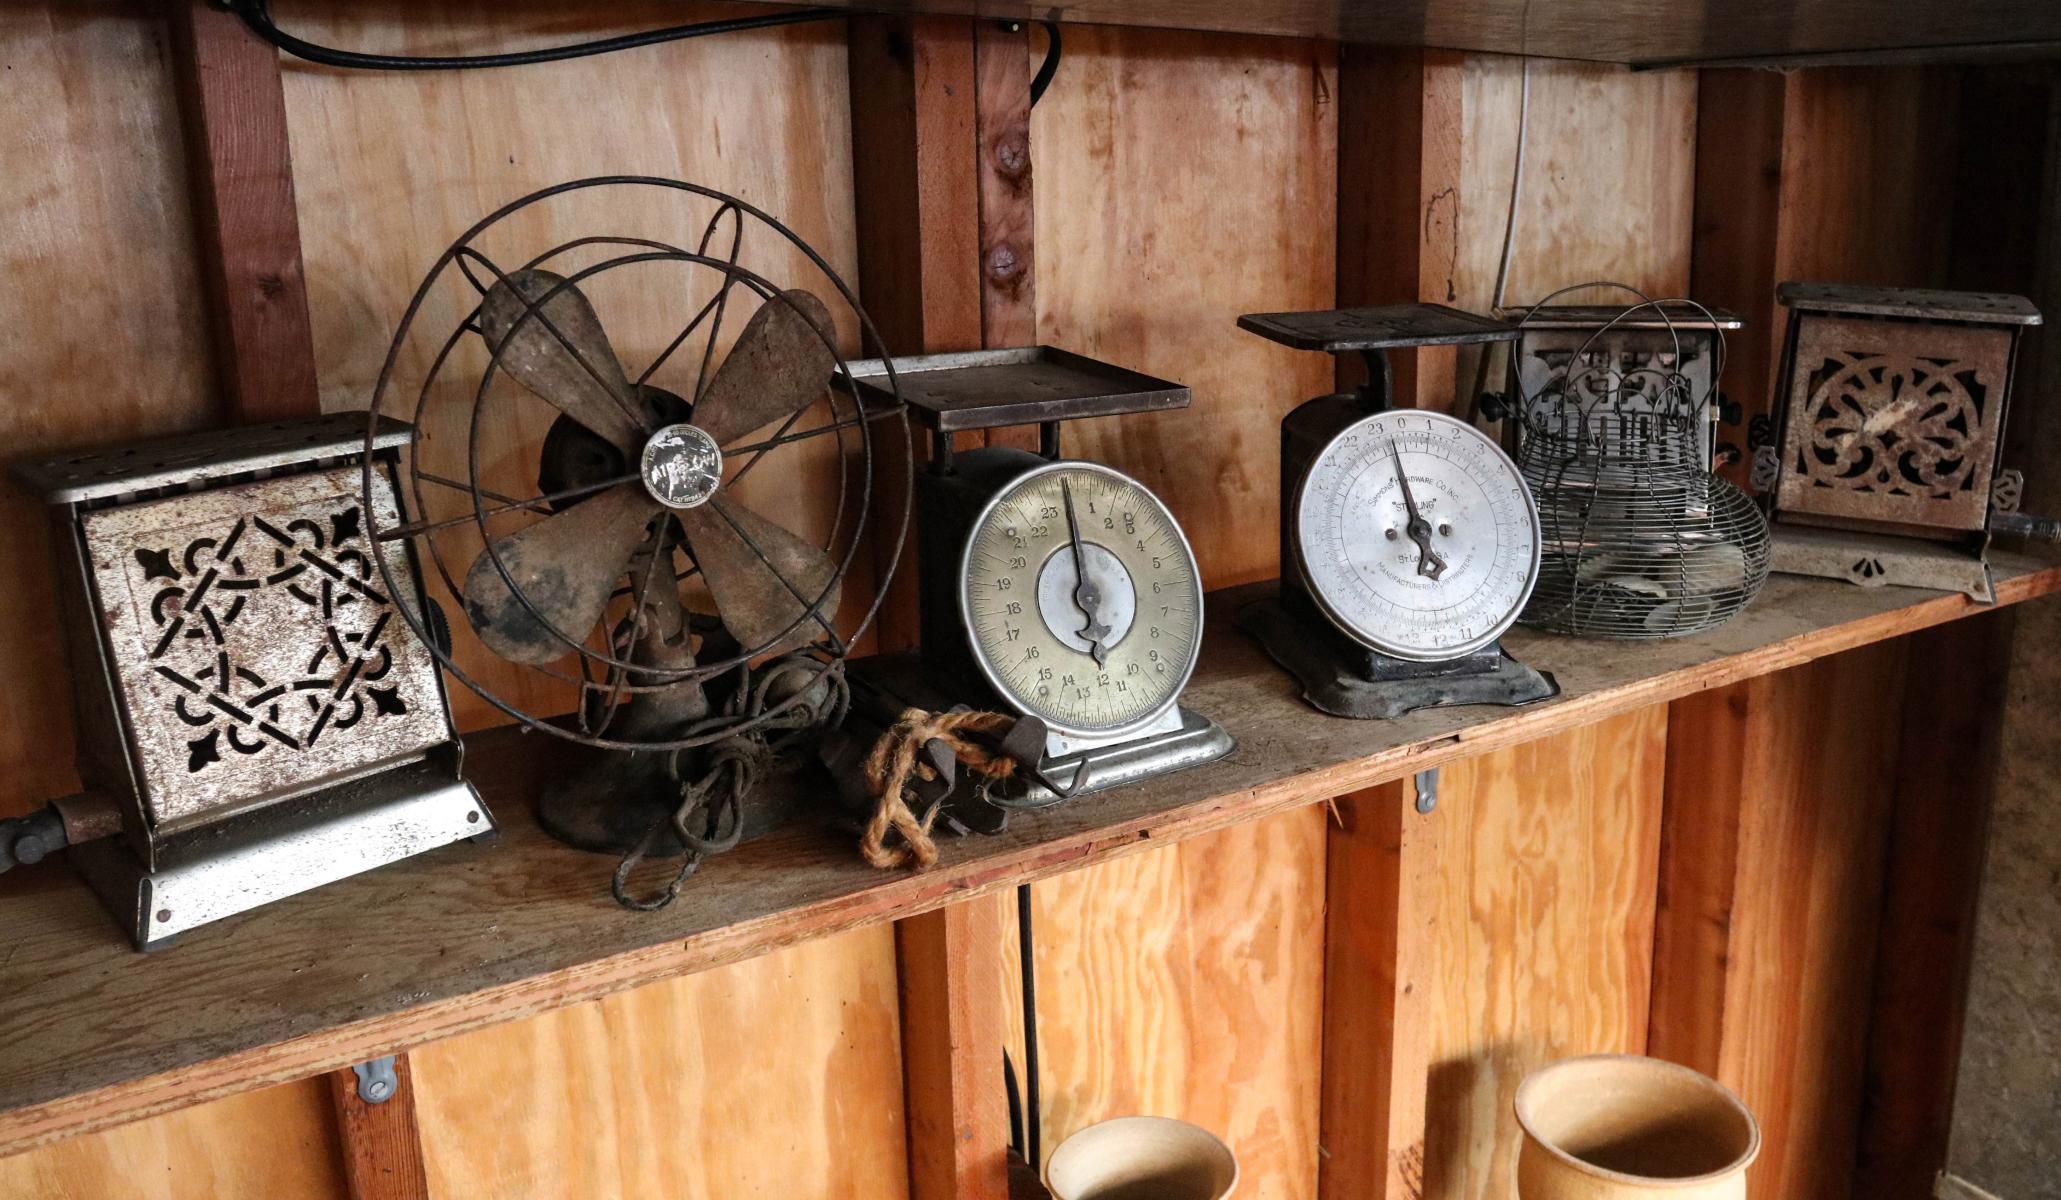 ANTIQUE FAN, SCALES, TOASTER